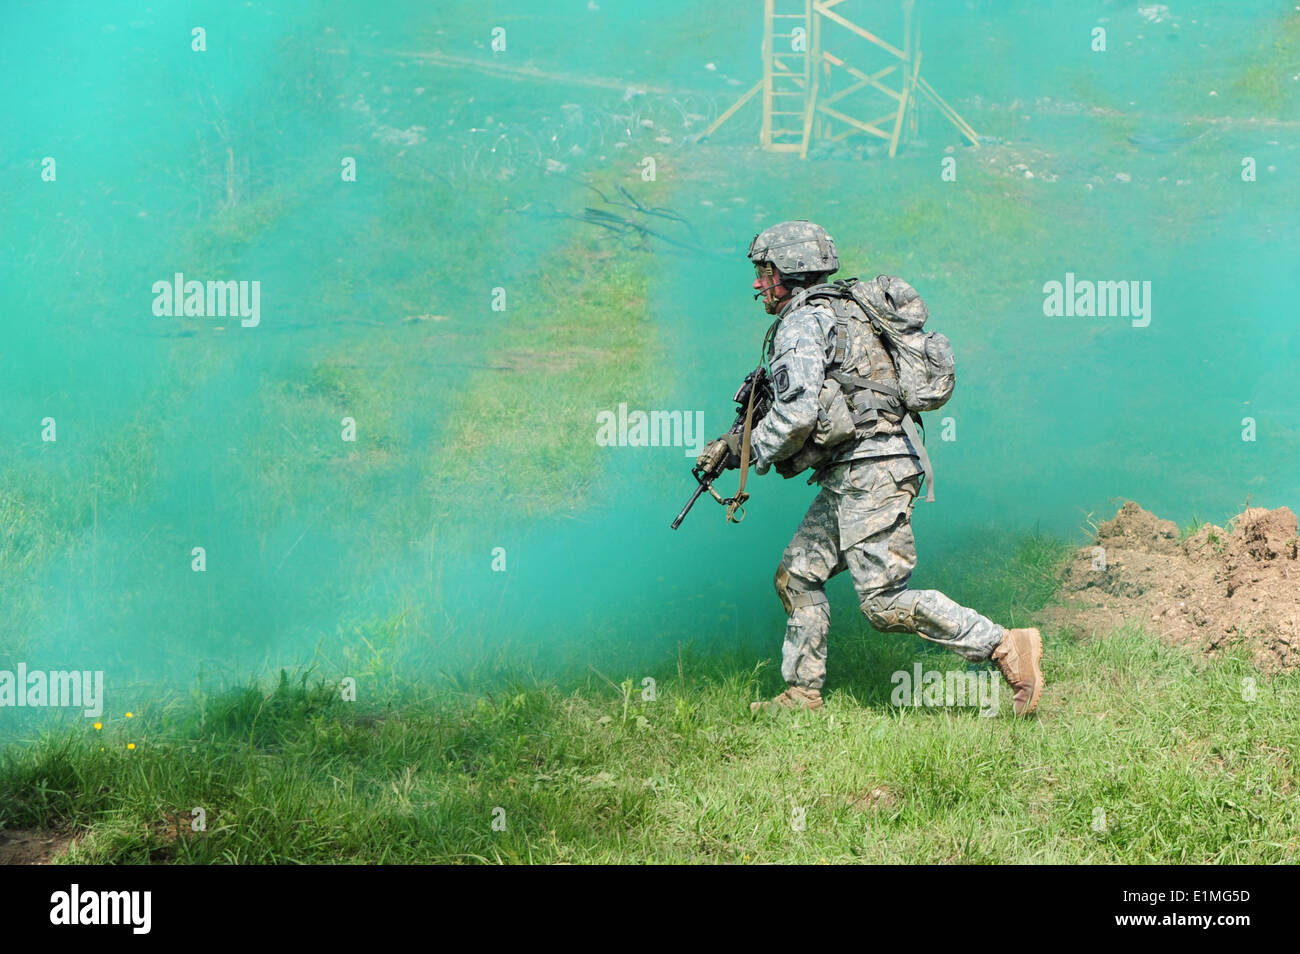 A U.S. Army paratrooper assigned to Battle Company, 2nd Battalion, 503rd Infantry Regiment, 173rd Airborne Brigade Combat Team Stock Photo